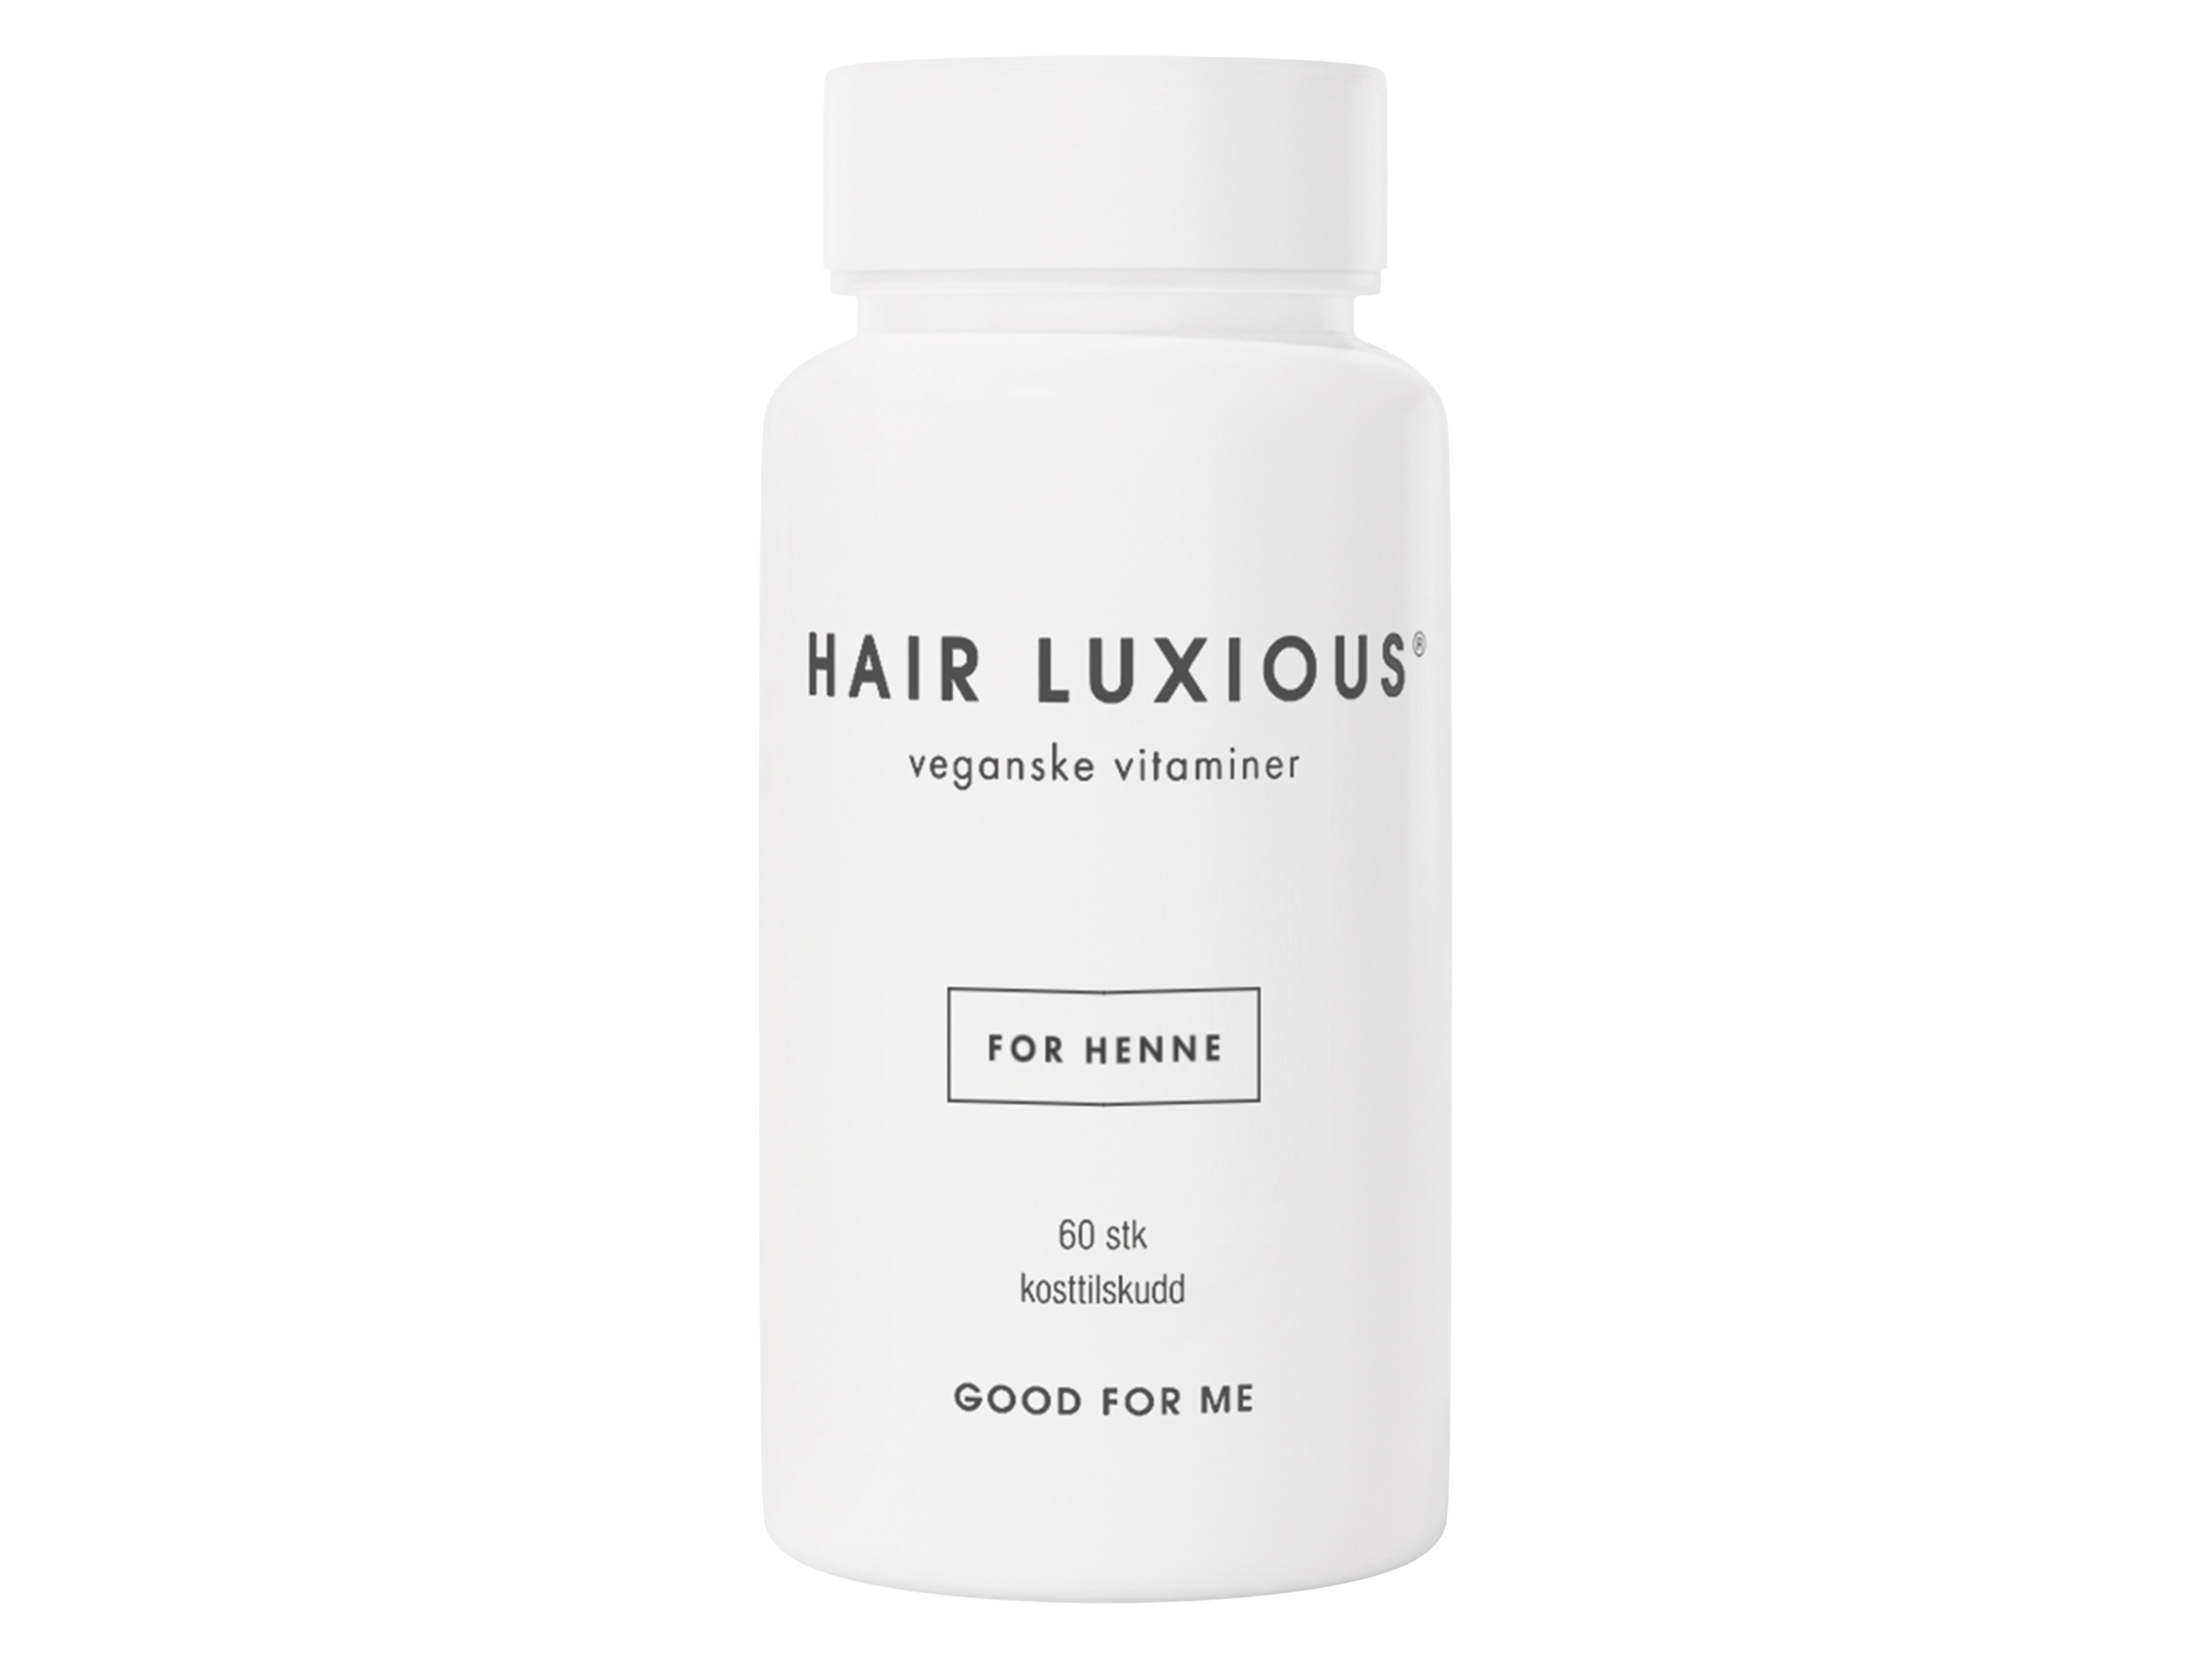 Good For Me Hair Luxious For henne Tabletter, 60 stk.